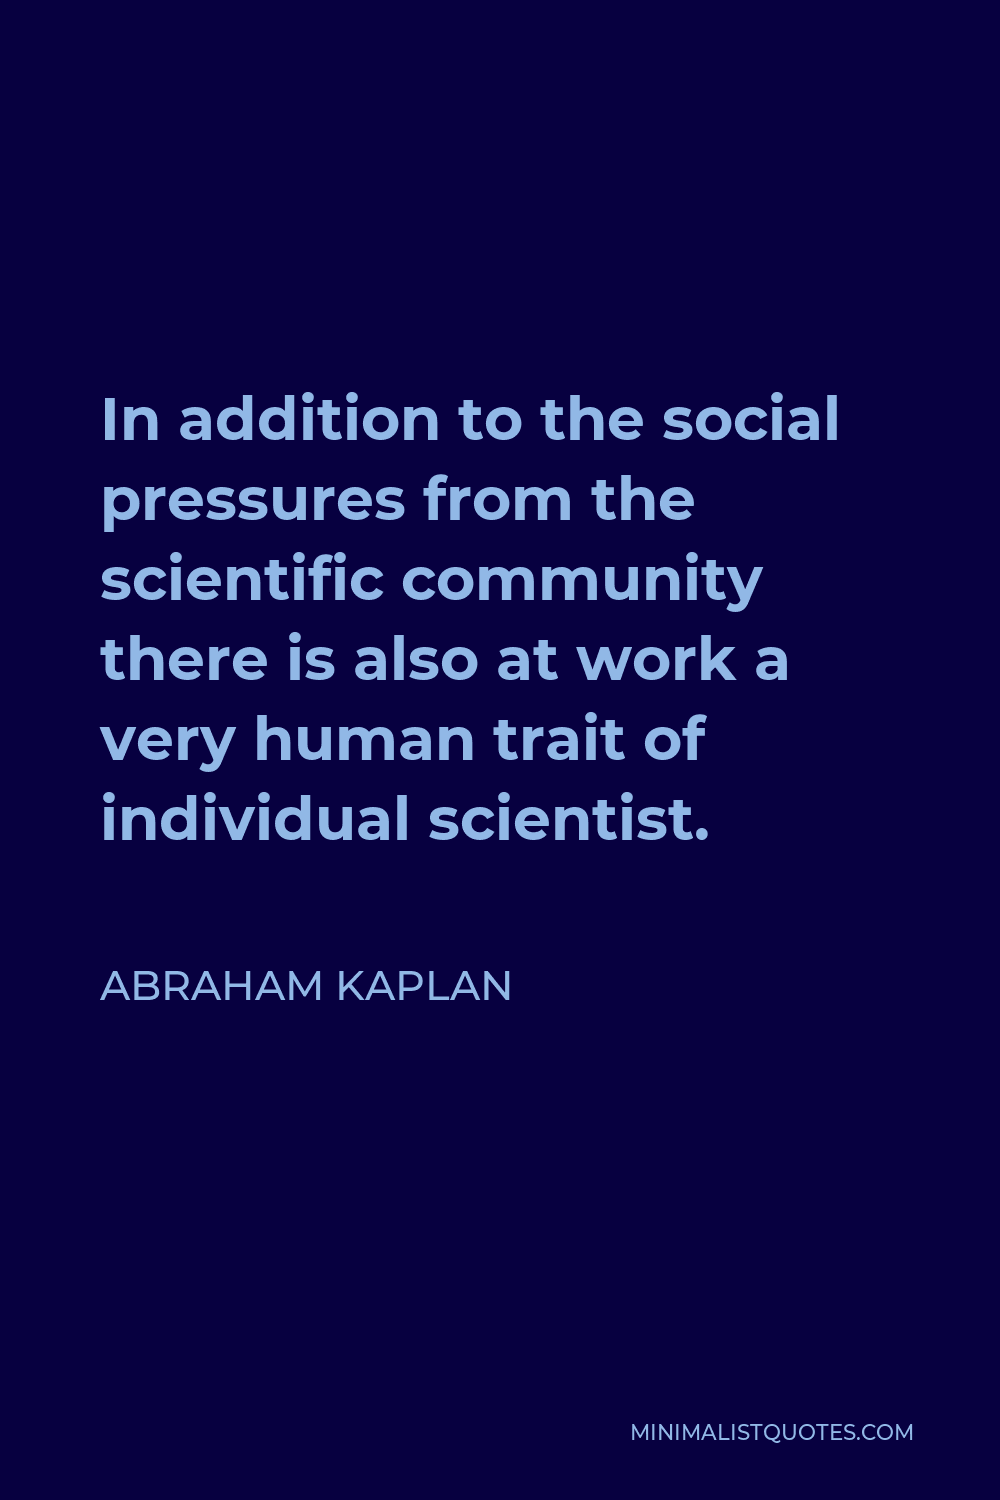 Abraham Kaplan Quote - In addition to the social pressures from the scientific community there is also at work a very human trait of individual scientist.